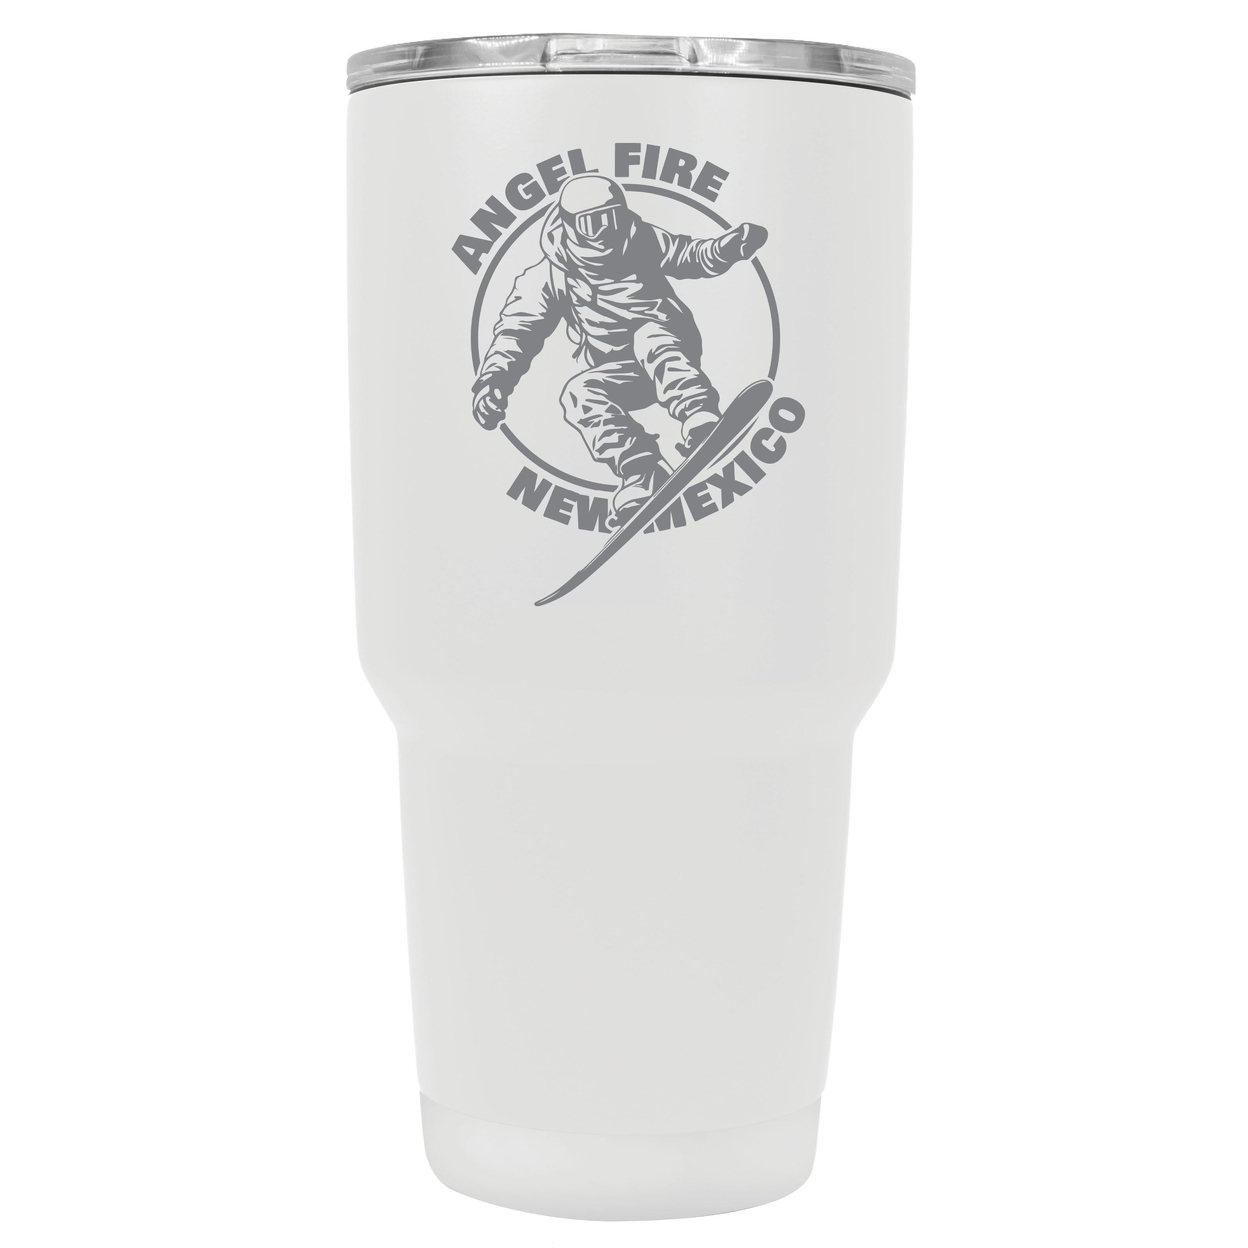 Angel Fire New Mexico Souvenir 24 Oz Engraved Insulated Stainless Steel Tumbler - Seafoam,,Single Unit